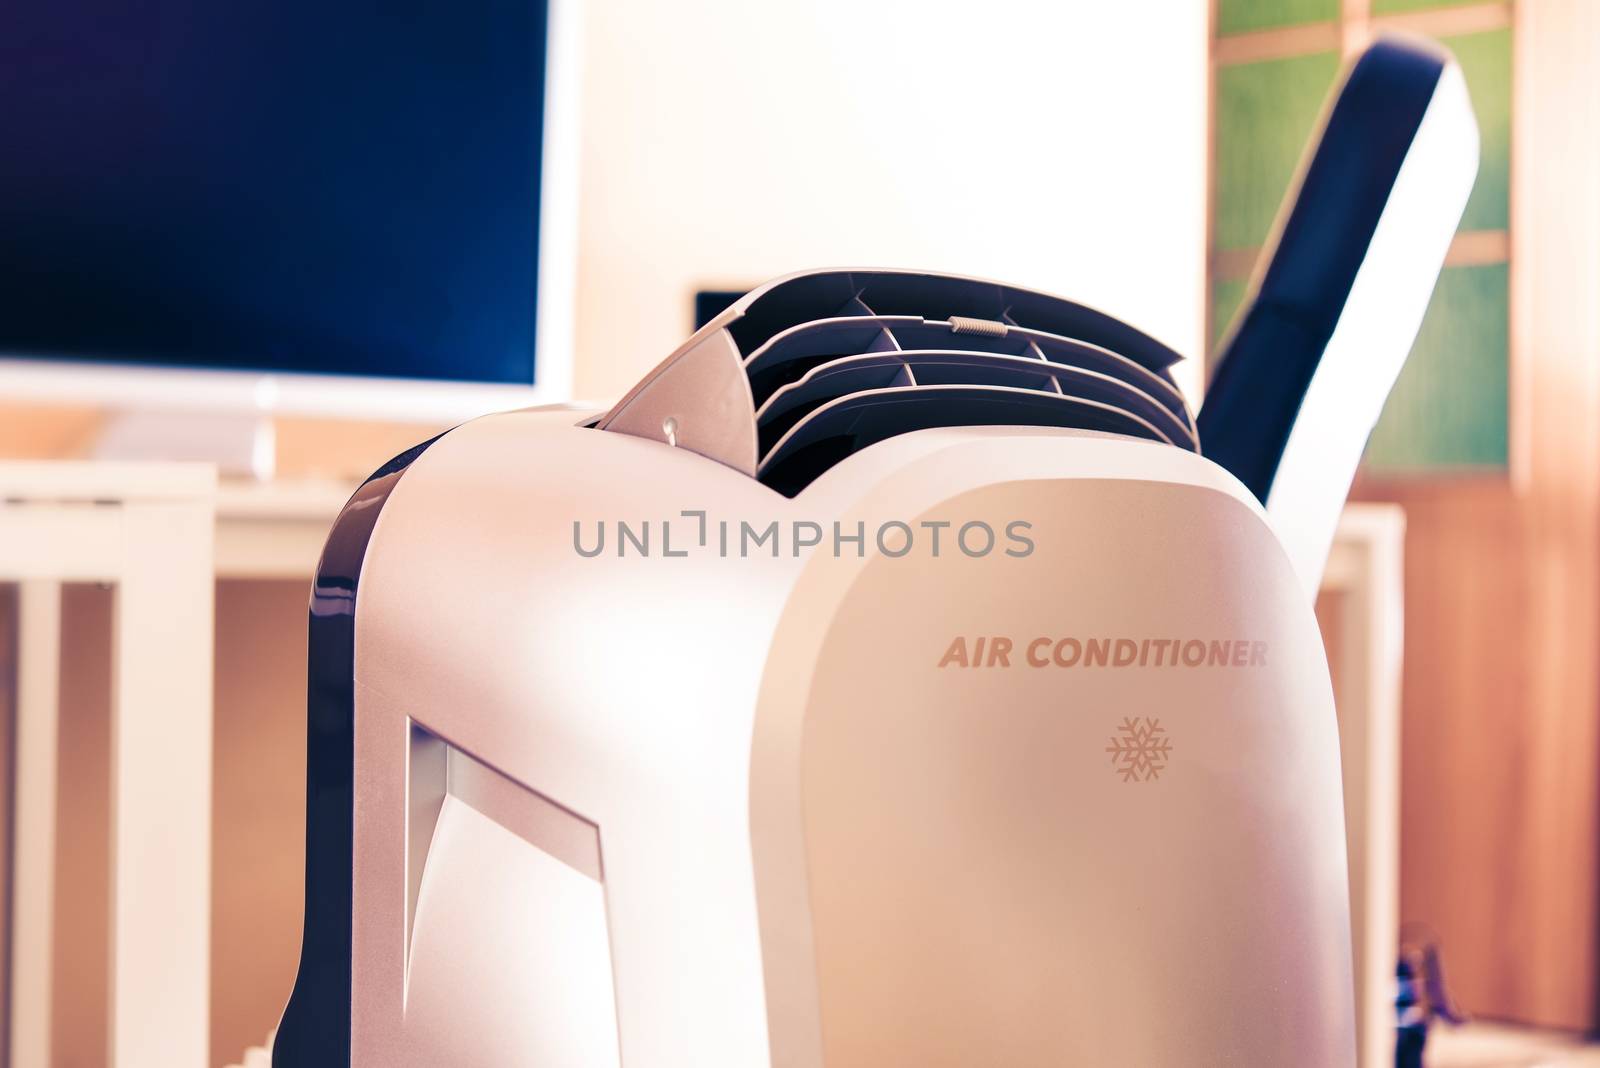 Air Conditioner in Office by welcomia